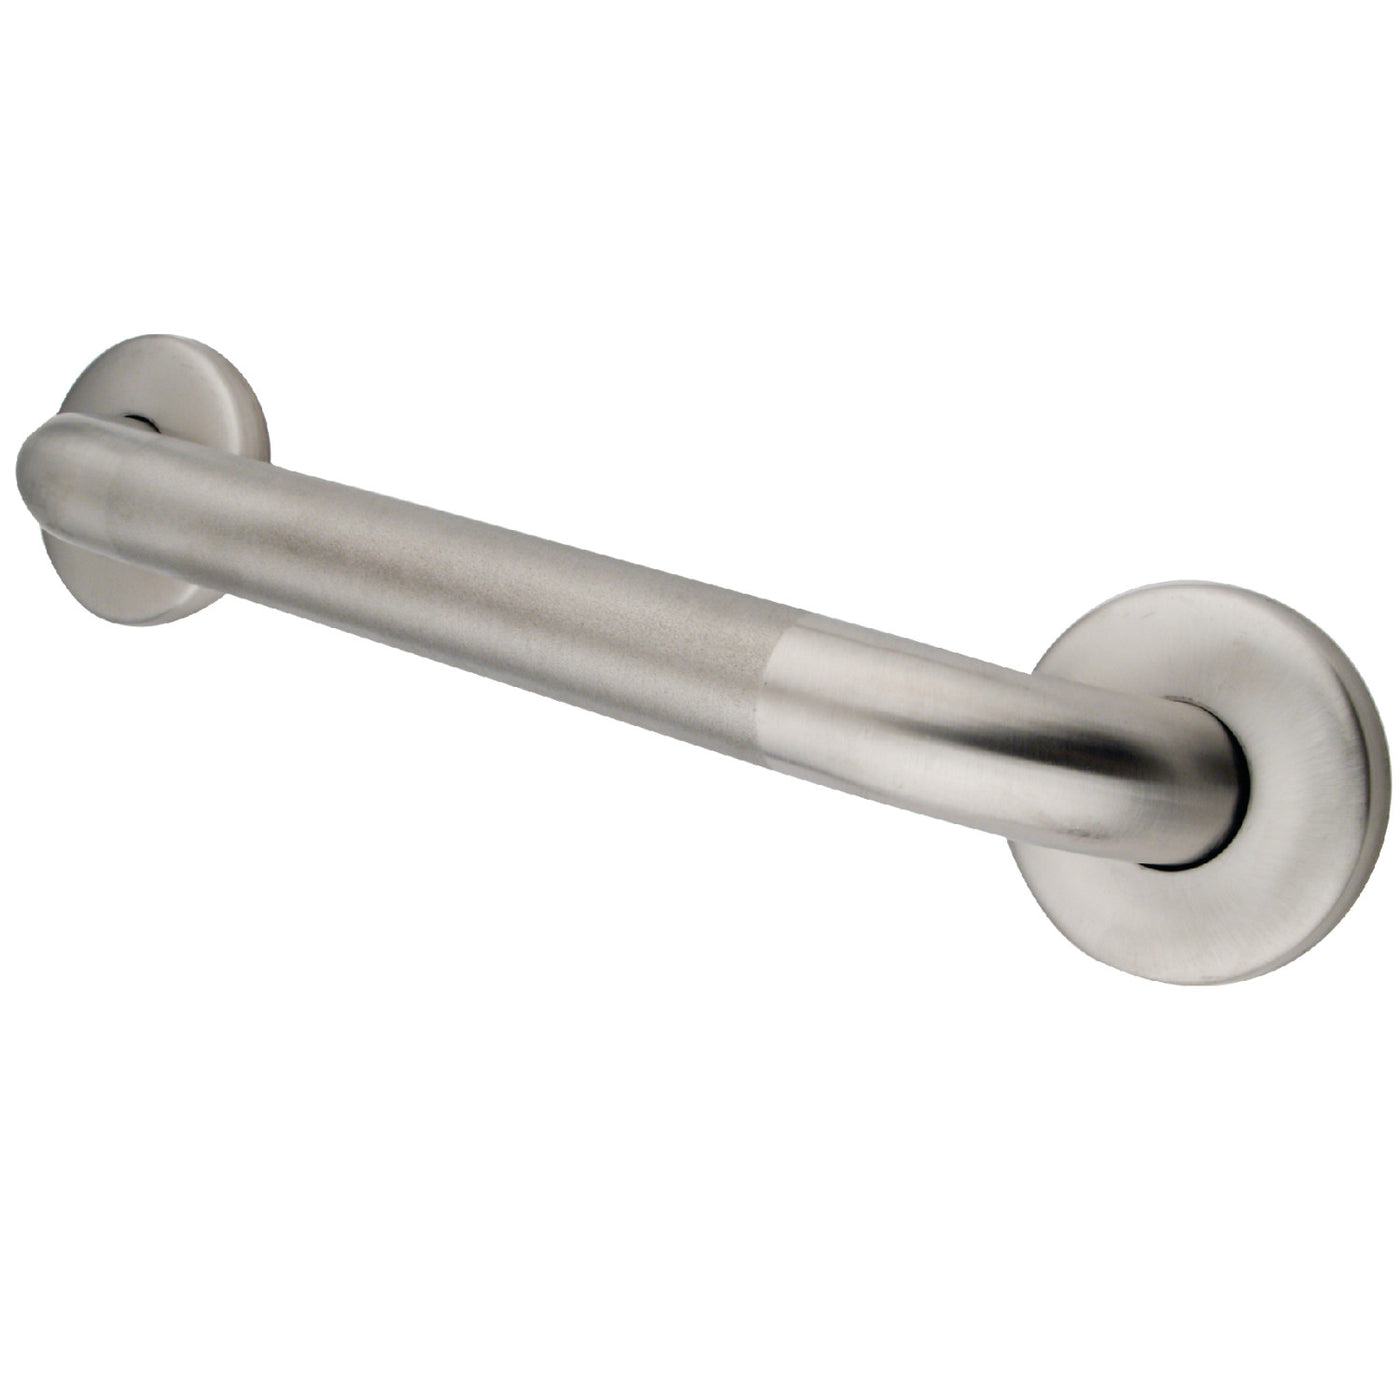 Elements of Design EGB1432CT 32-Inch Stainless Steel Grab Bar, Brushed